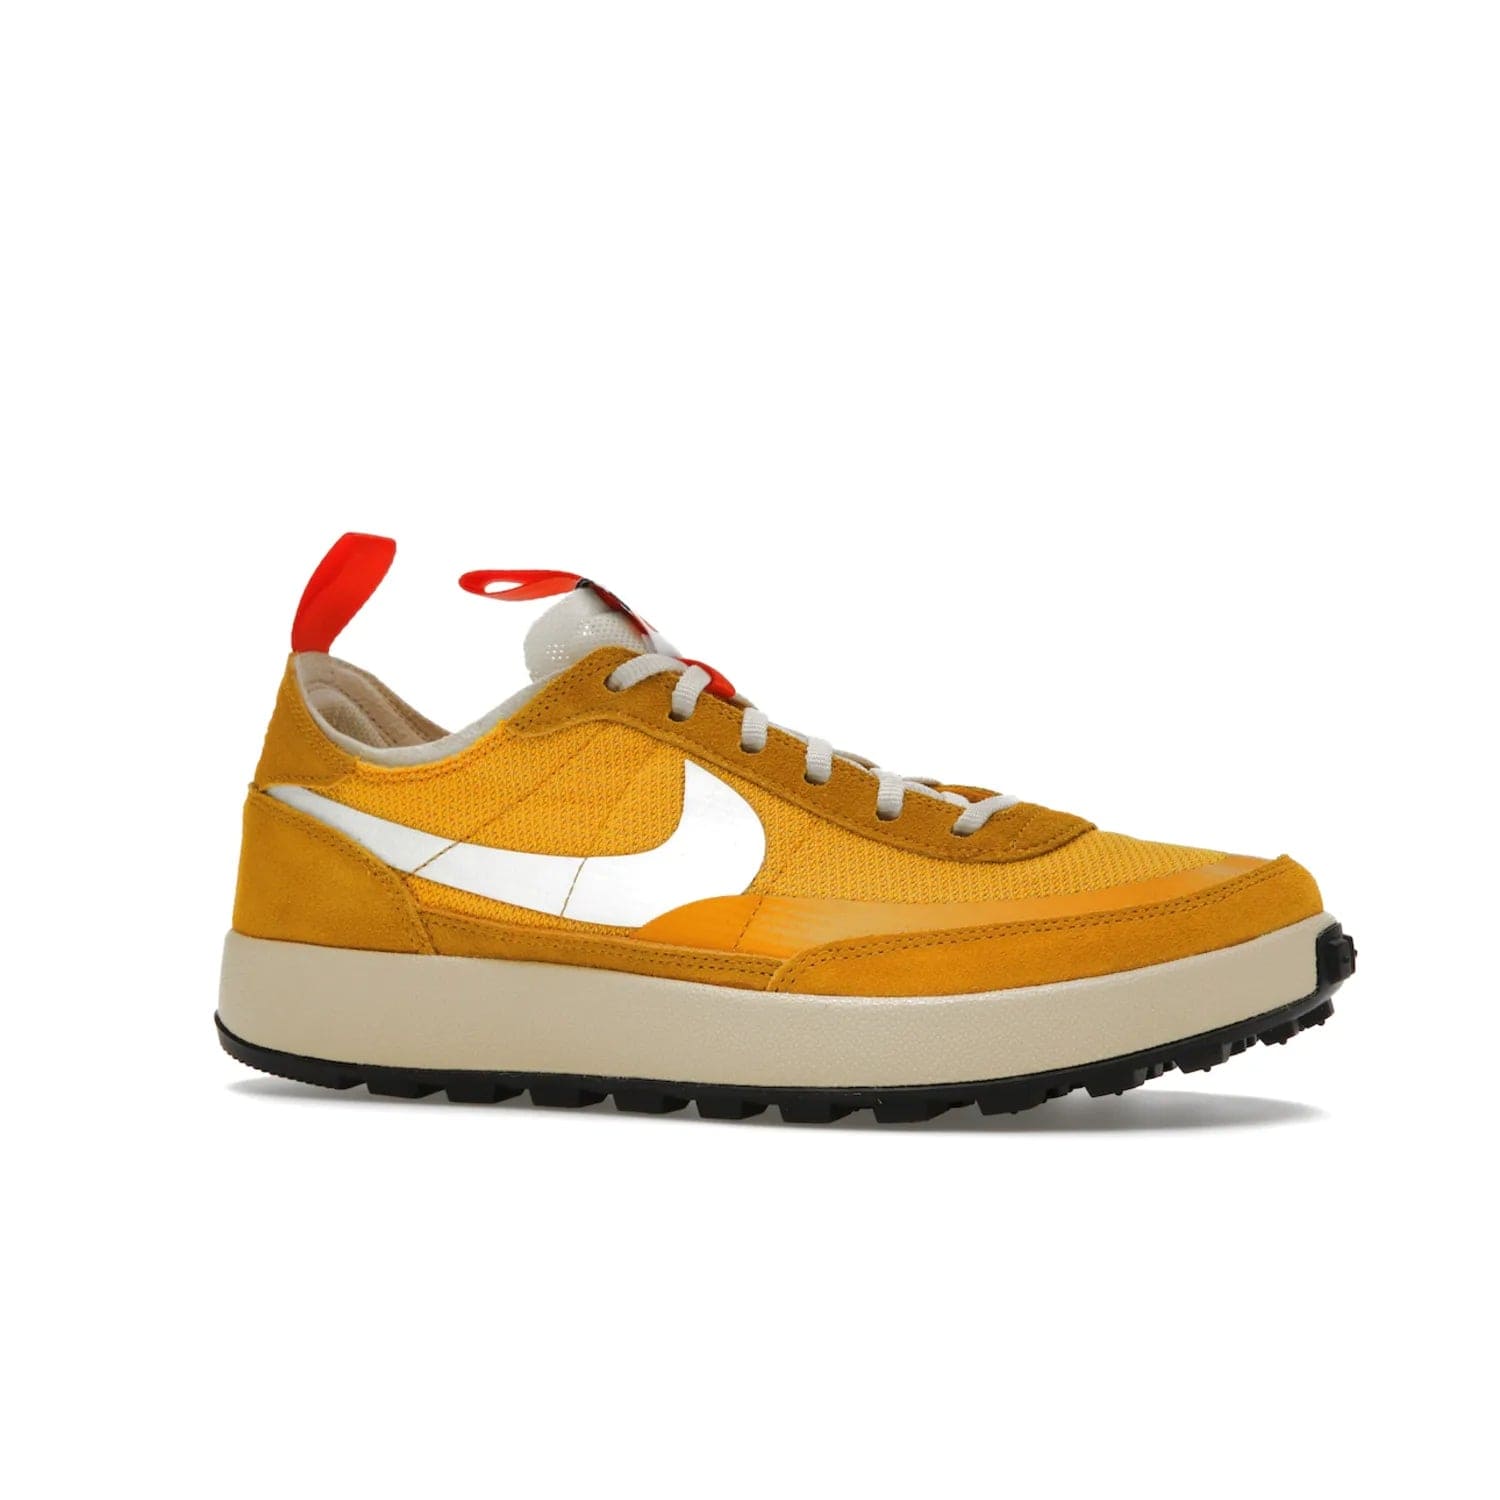 NikeCraft General Purpose Shoe Tom Sachs Archive Dark Sulfur - Image 3 - Only at www.BallersClubKickz.com - Collab between Nike & Tom Sachs. The NikeCraft General Purpose Shoe features dark sulfur mesh upper, suede overlays, contrasting white Swoosh and orange tabs. EVA cushioning & black waffle-traction rubber outsole ensures performance. Stylish & perfect for any occasion, the shoe released September 2, 2022.